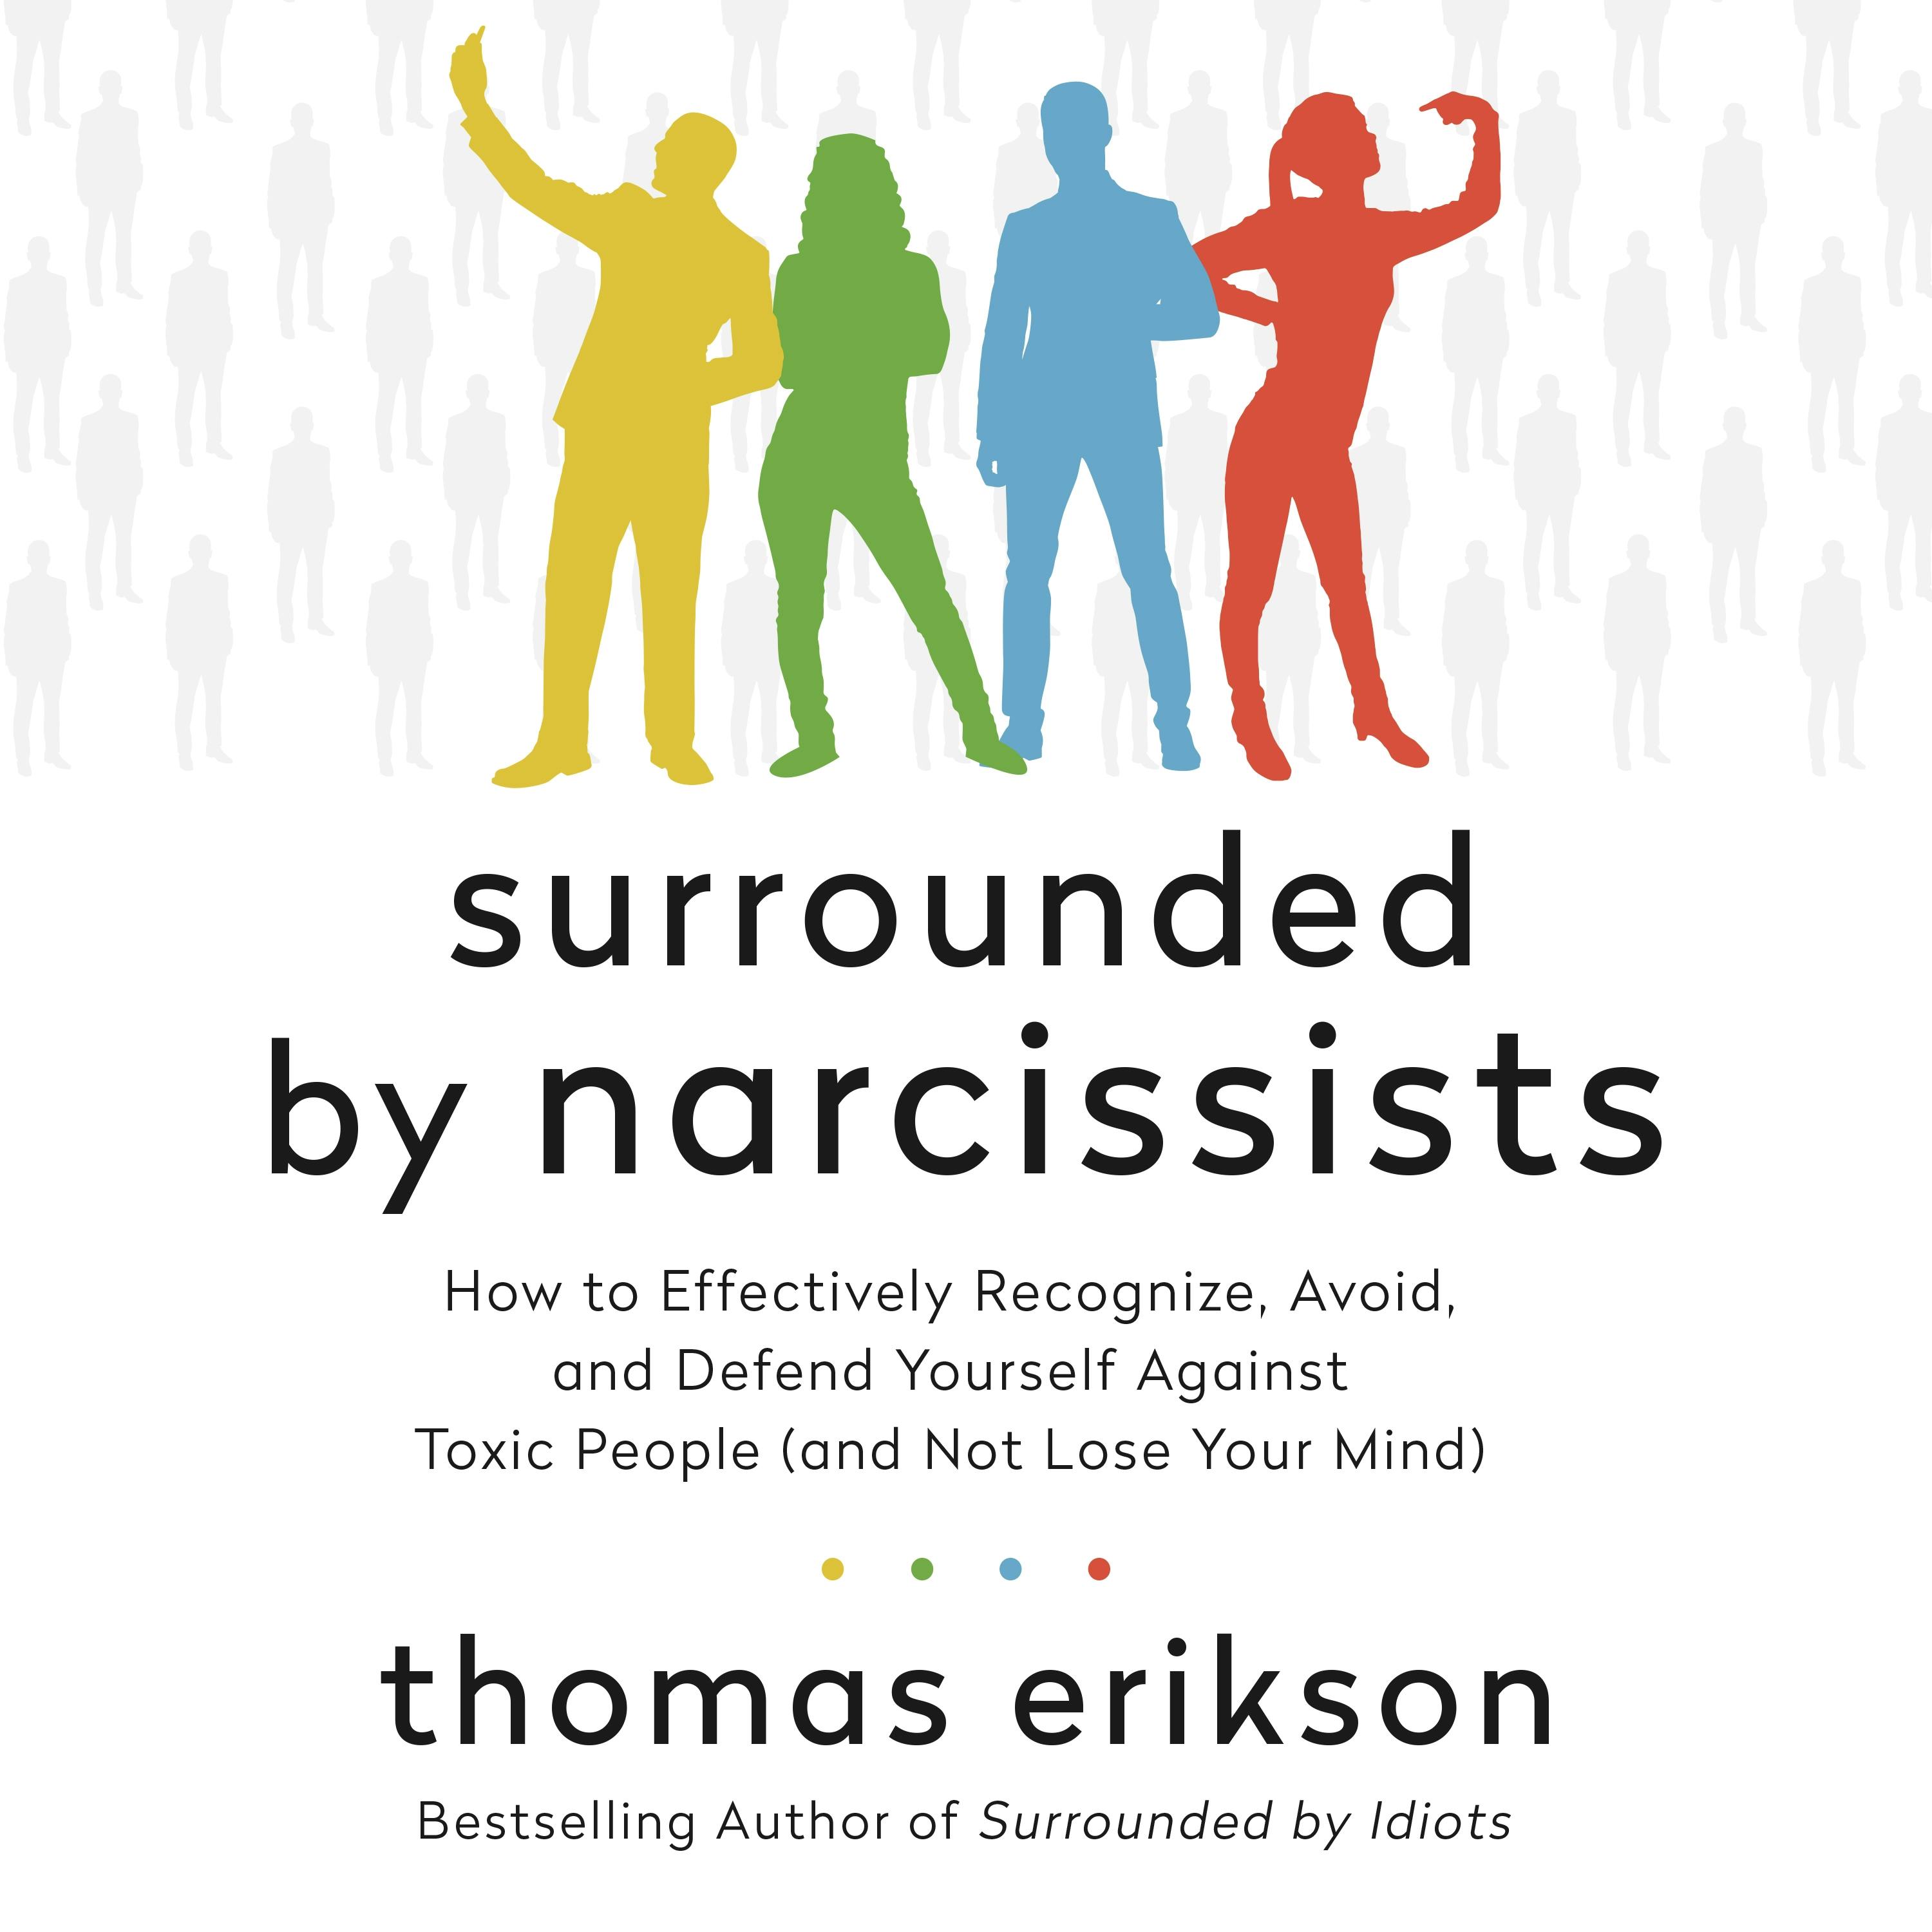 How To Spot A Narcissist Early In A Relationship - Dear Media